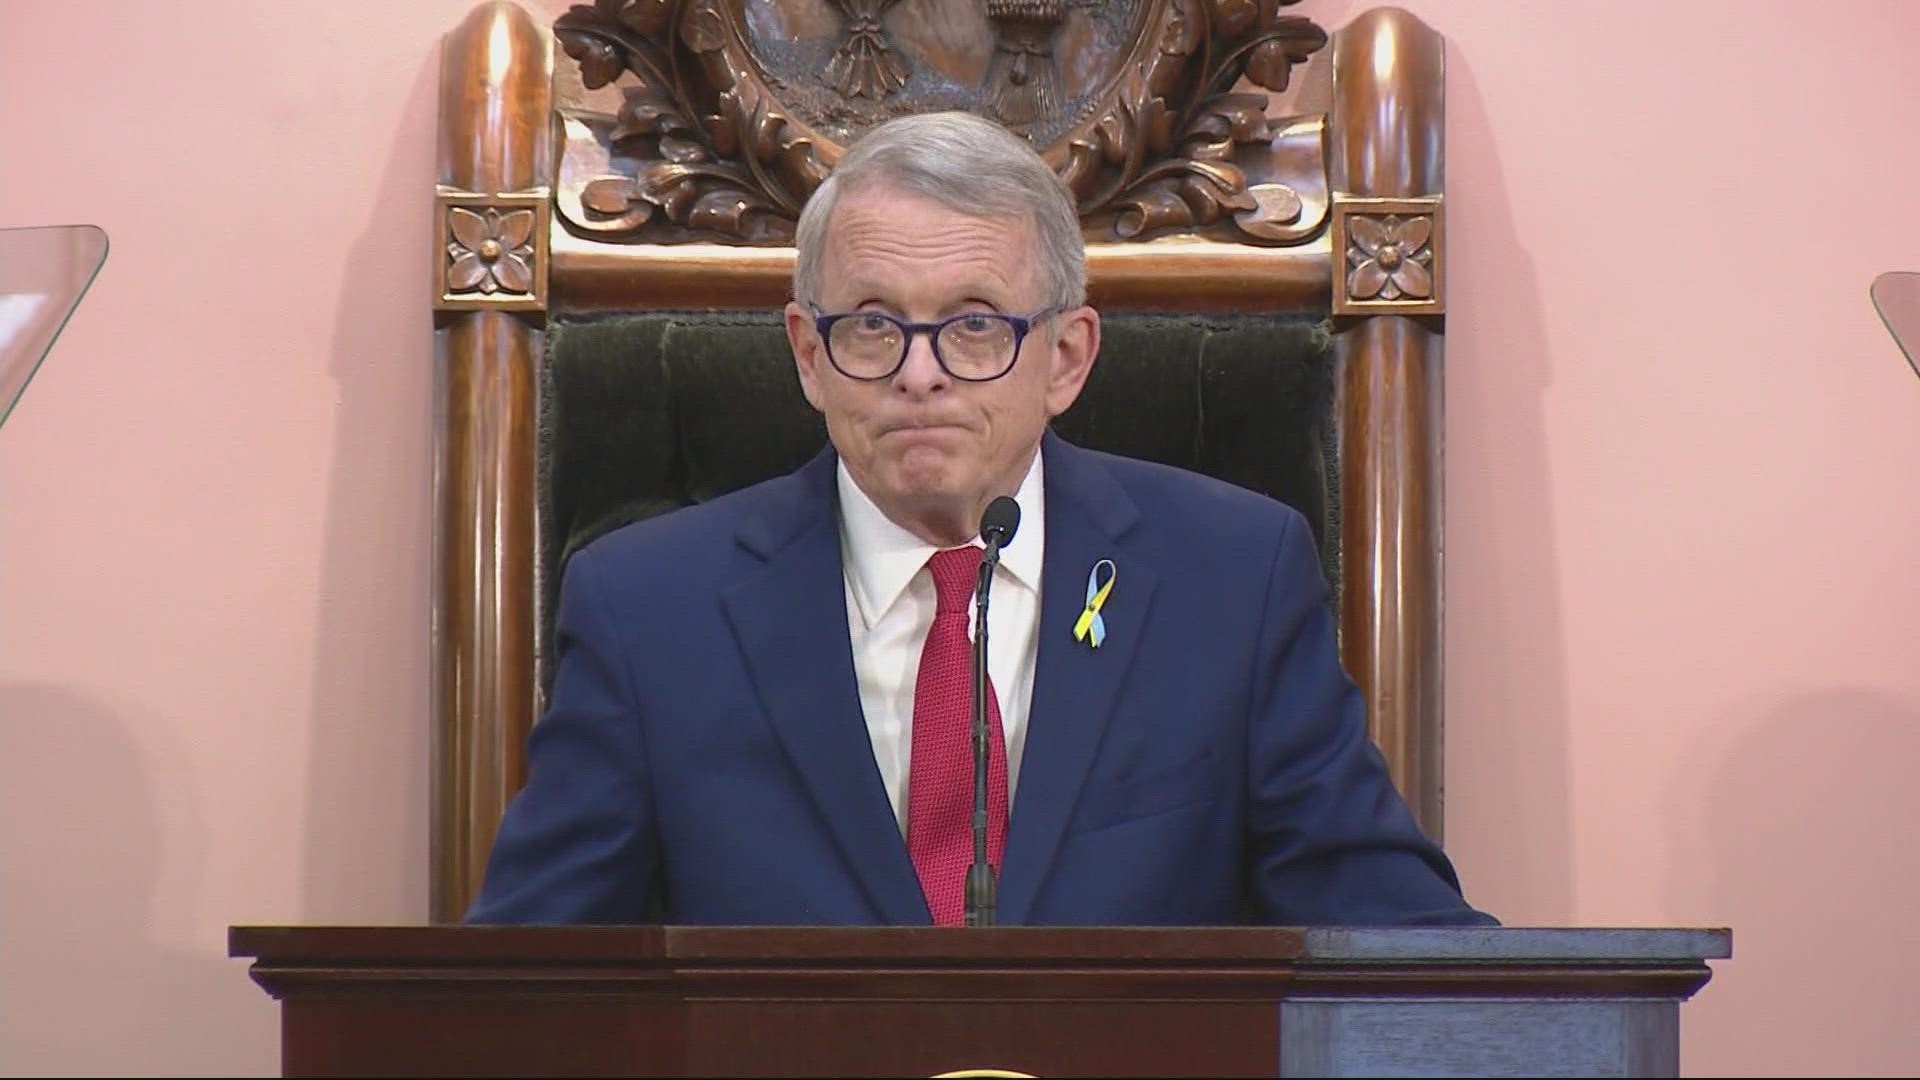 DeWine delivered his last State of the State address of his first term at the Ohio Statehouse on Wednesday.